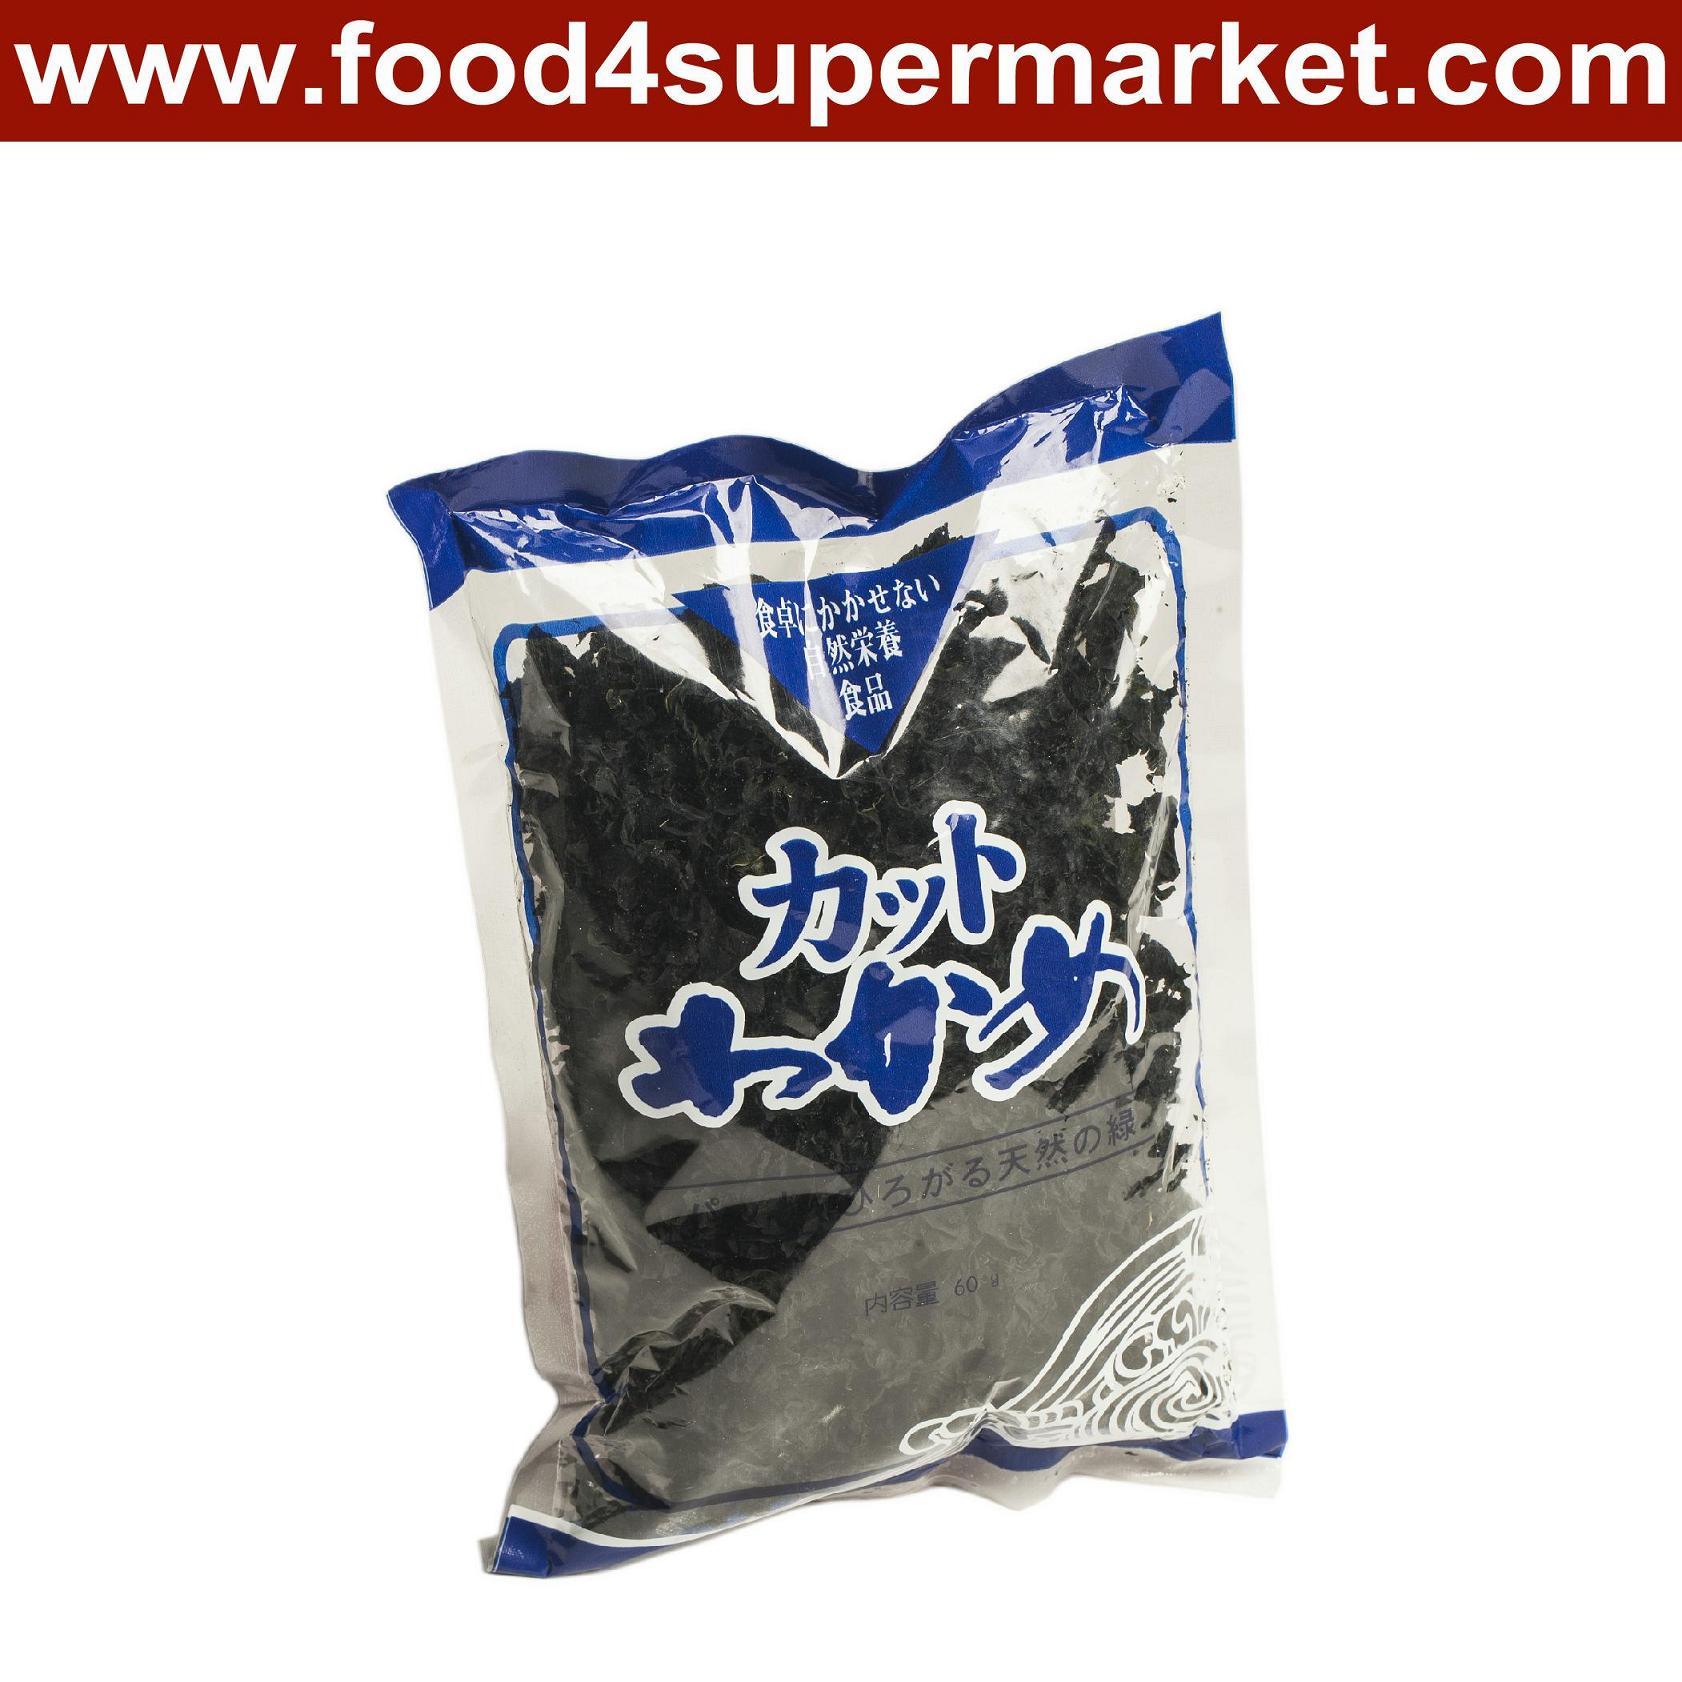 Dried Wakamedried Laver Wakame for Soup in Plastic Bag 100g